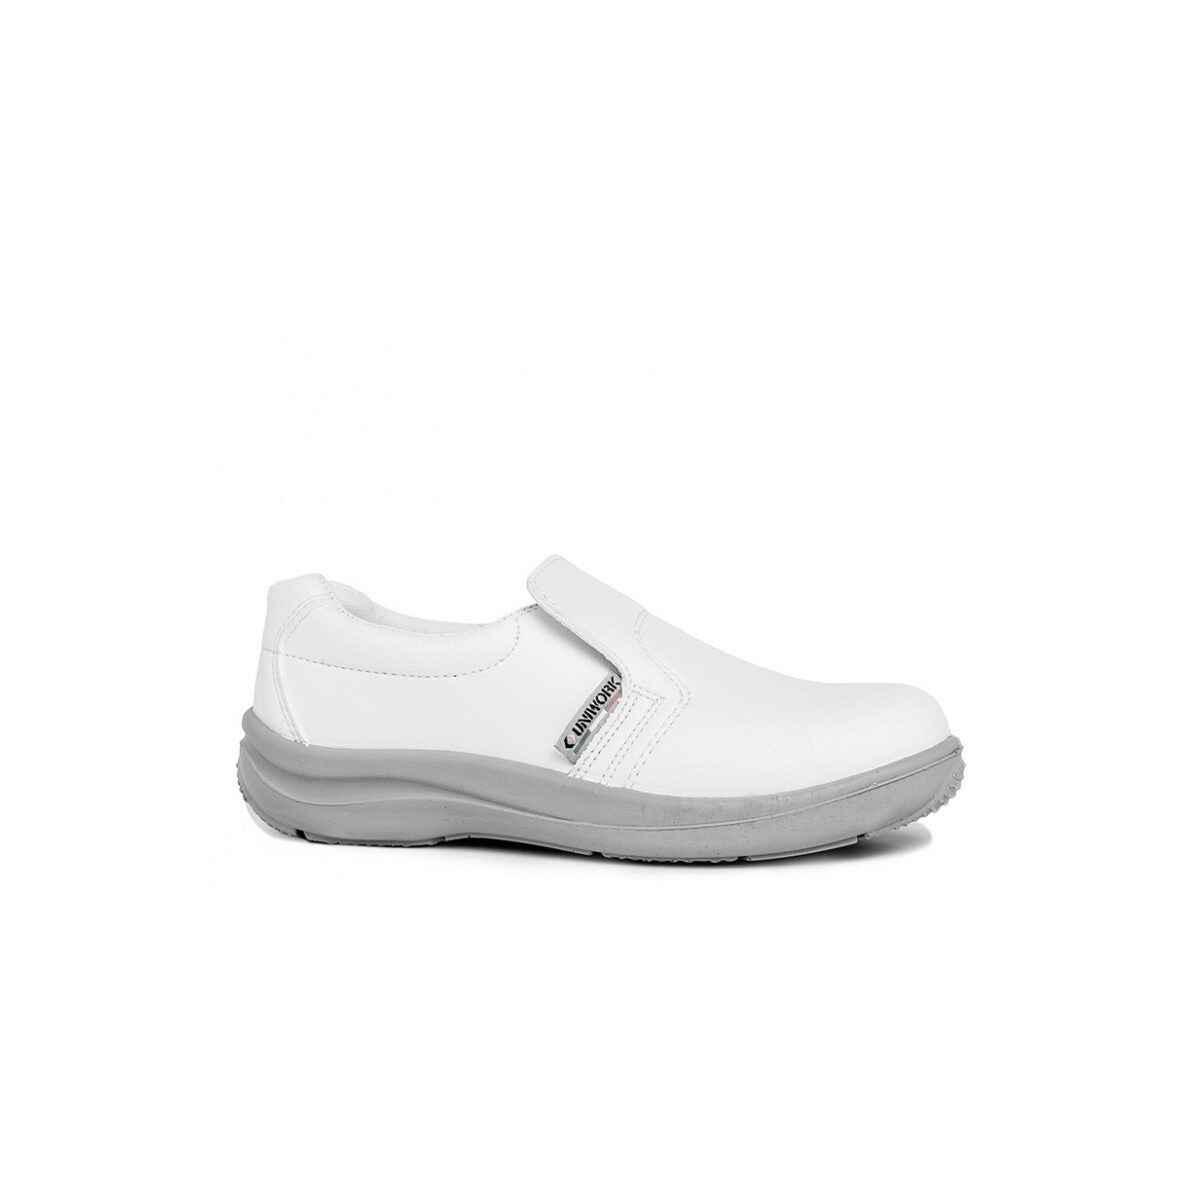 CHAUSSURE SECURIT  MIXTE BLANC TAILLE 46